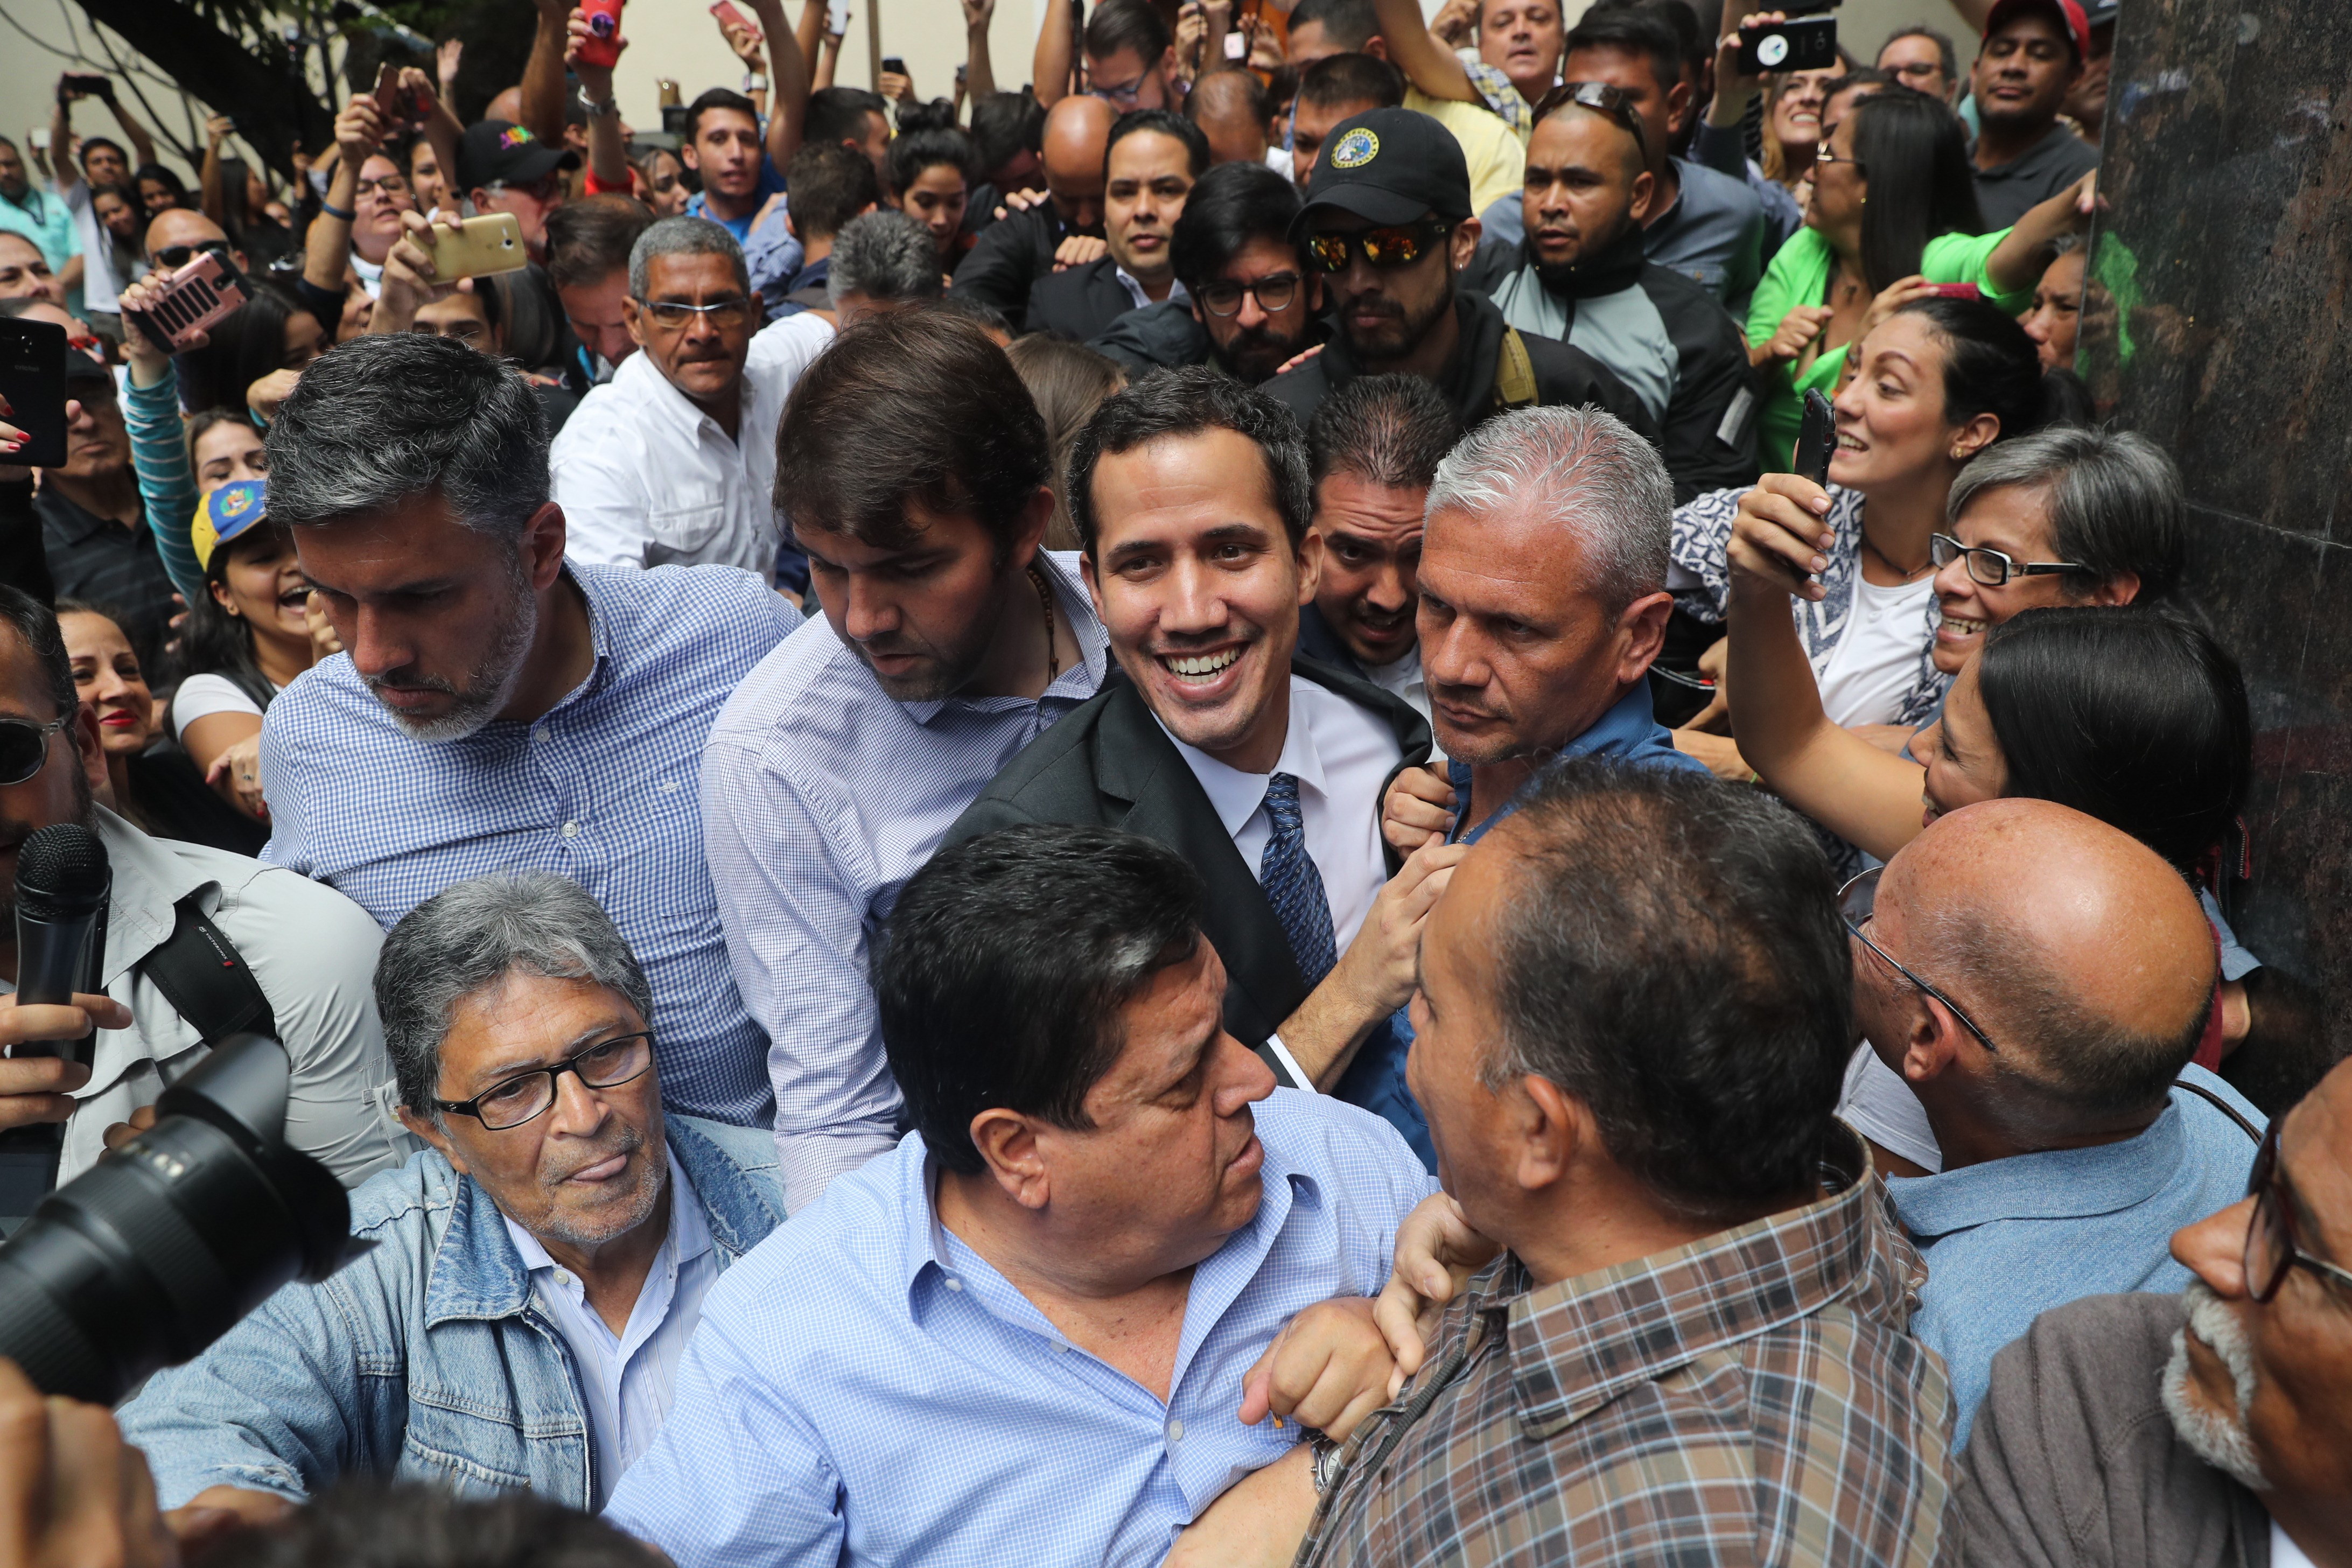 epa07319207 Head of the Venezuelan Parliament, Juan Guaido (C), upon his arrival to a public event with deputies in a square in the east of Caracas, Venezuela, 25 January 2018. Guaido, who two days ago announced that he assumed executive powers as interim president, asked on Friday for a minute of silence for the victims of 'the brutal repression'.  EPA/Miguel Guitérrez